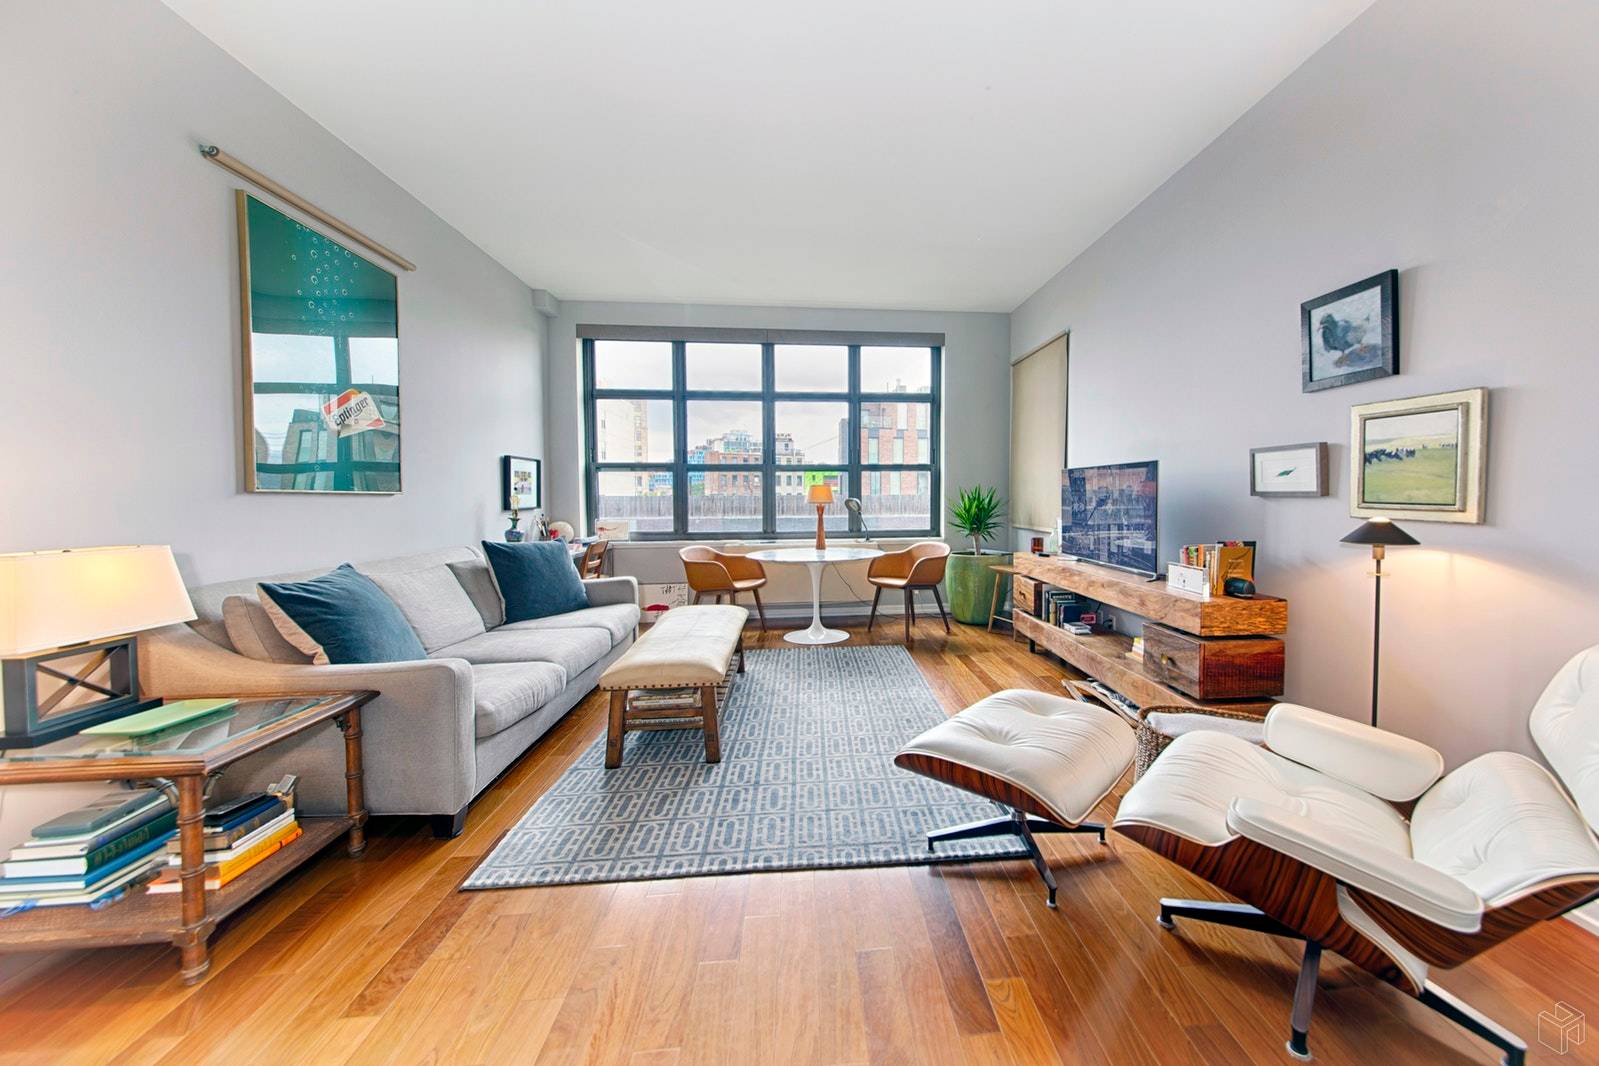 This rare and oversized mint one bedroom offers jaw dropping Williamsburg bridge and Manhattan skyline views as well as sunny southern exposure all day long.